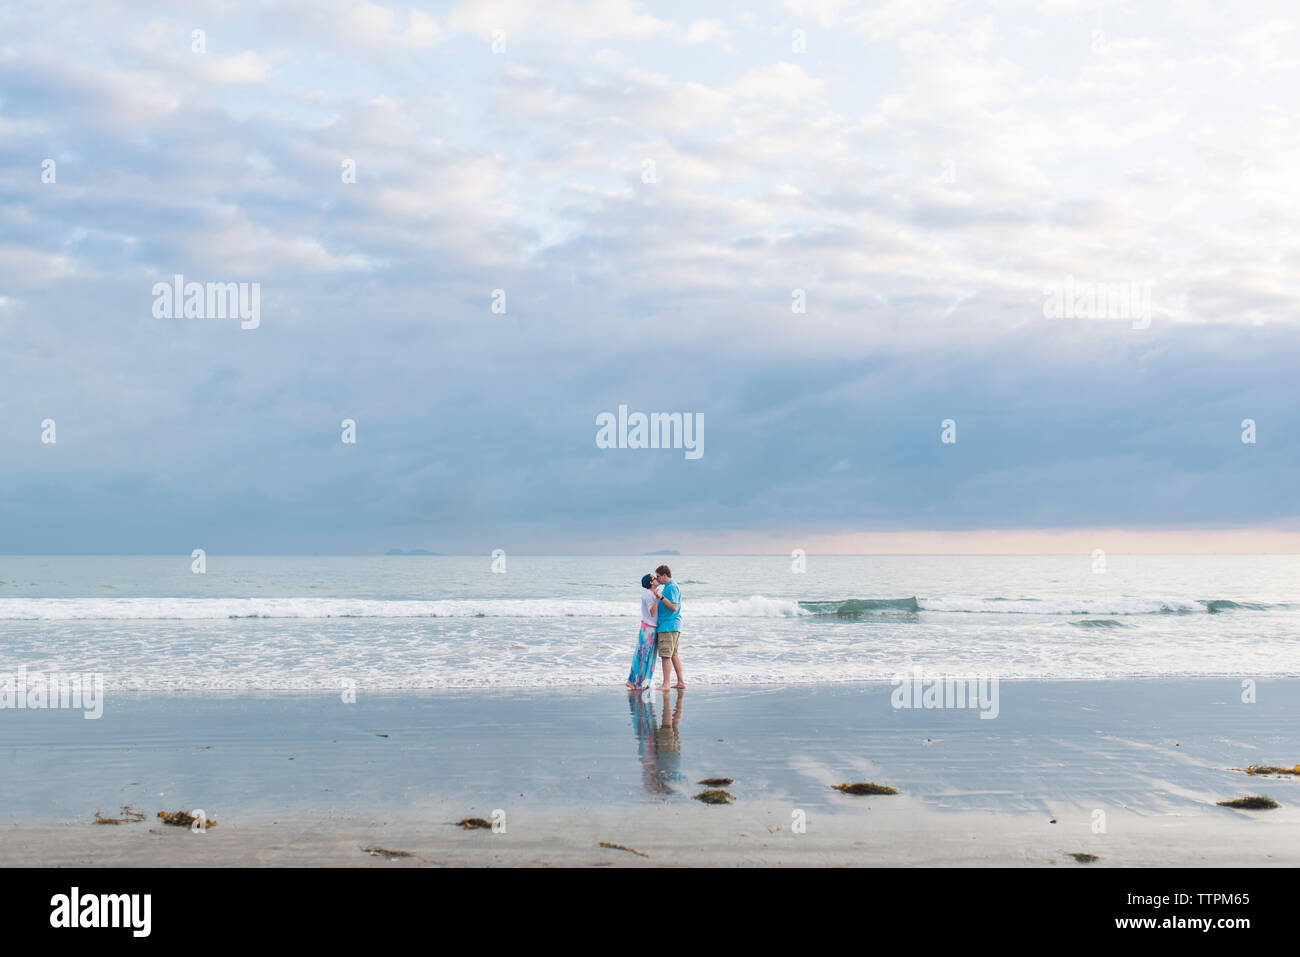 Loving couple standing on shore at beach against cloudy sky Stock Photo